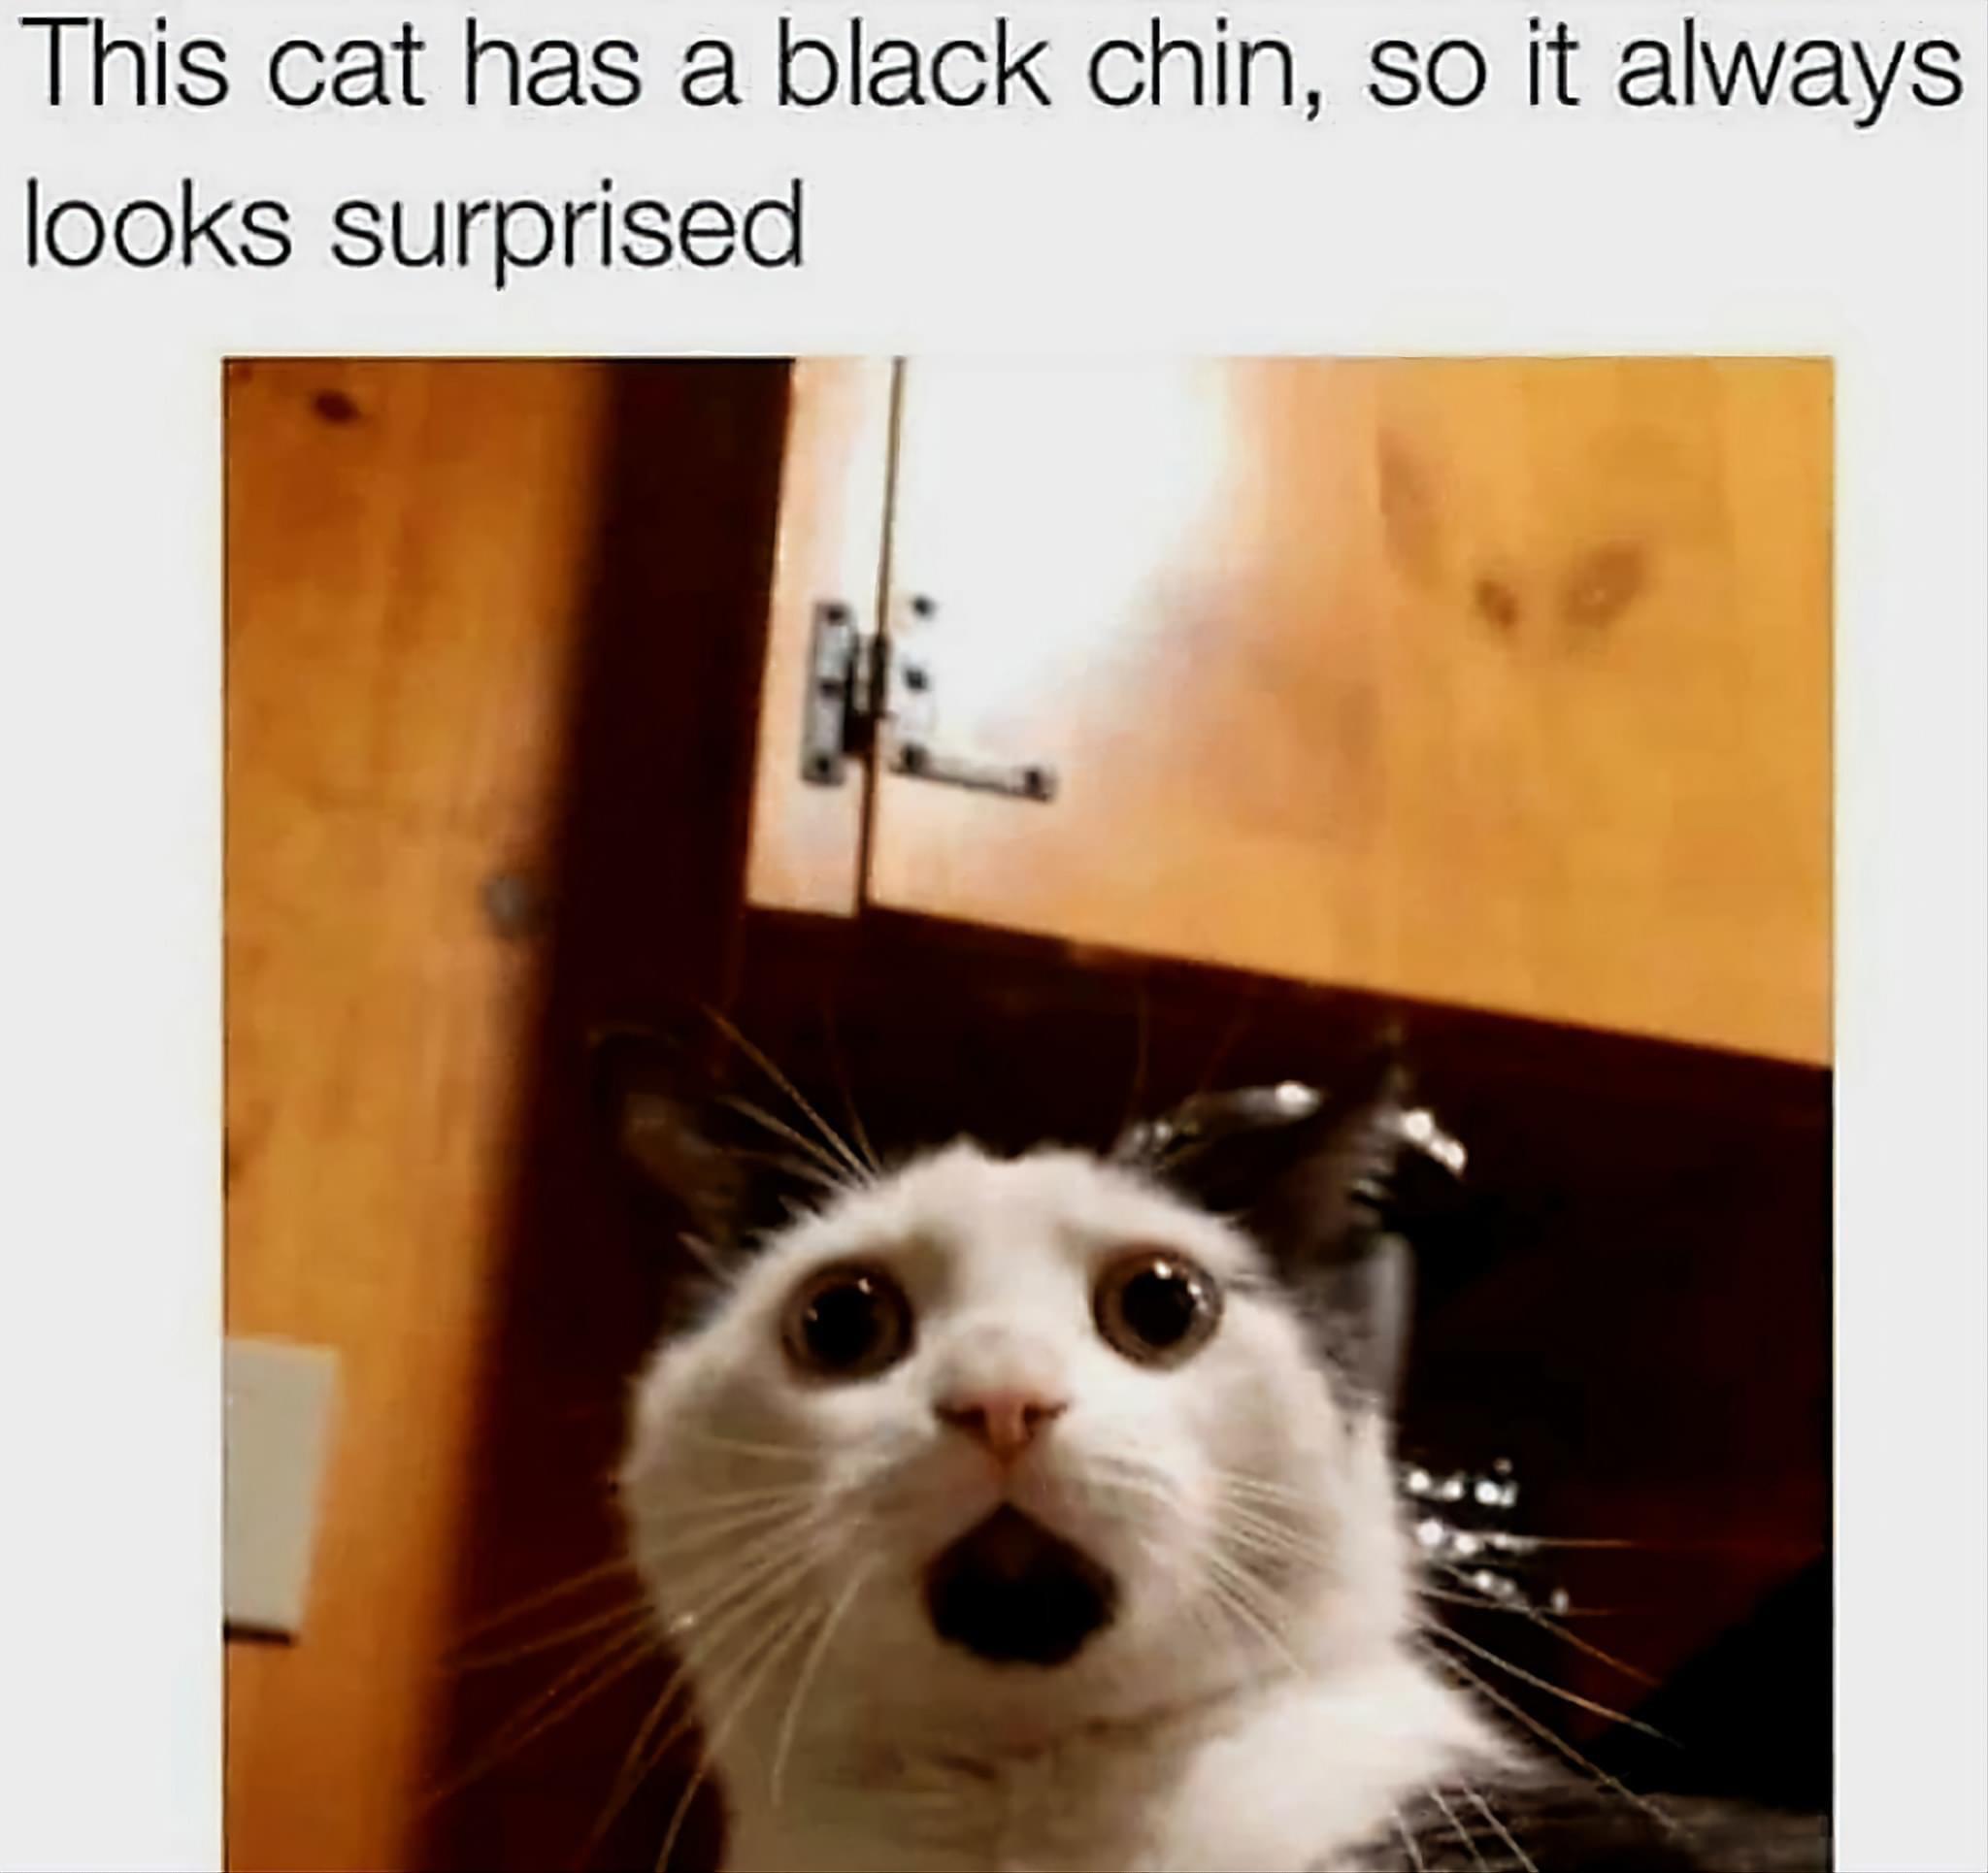 monday morning randomness - surprised cat memes - This cat has a black chin, so it always looks surprised